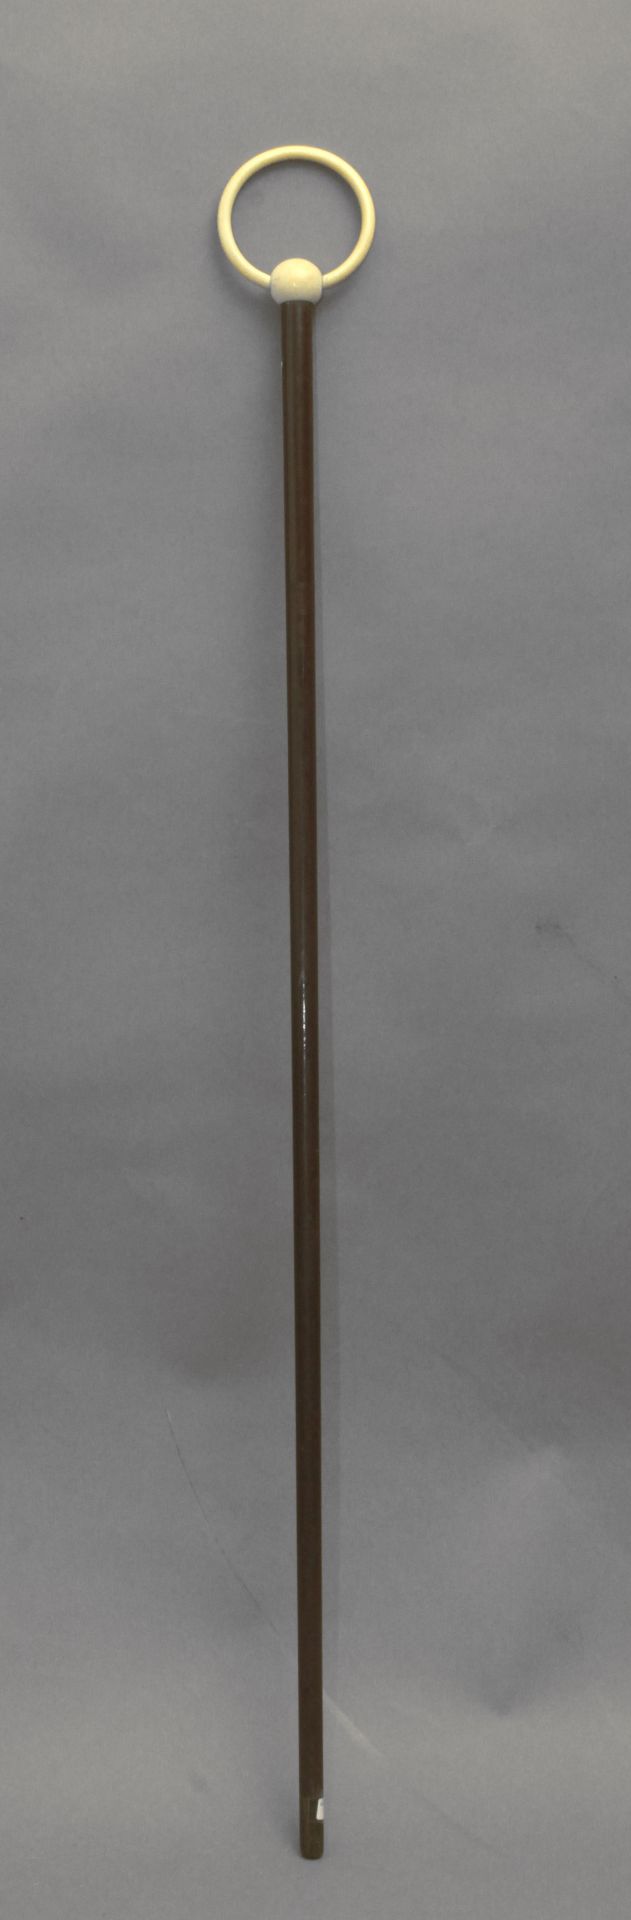 A first half of 20th century walking stick - Image 2 of 5